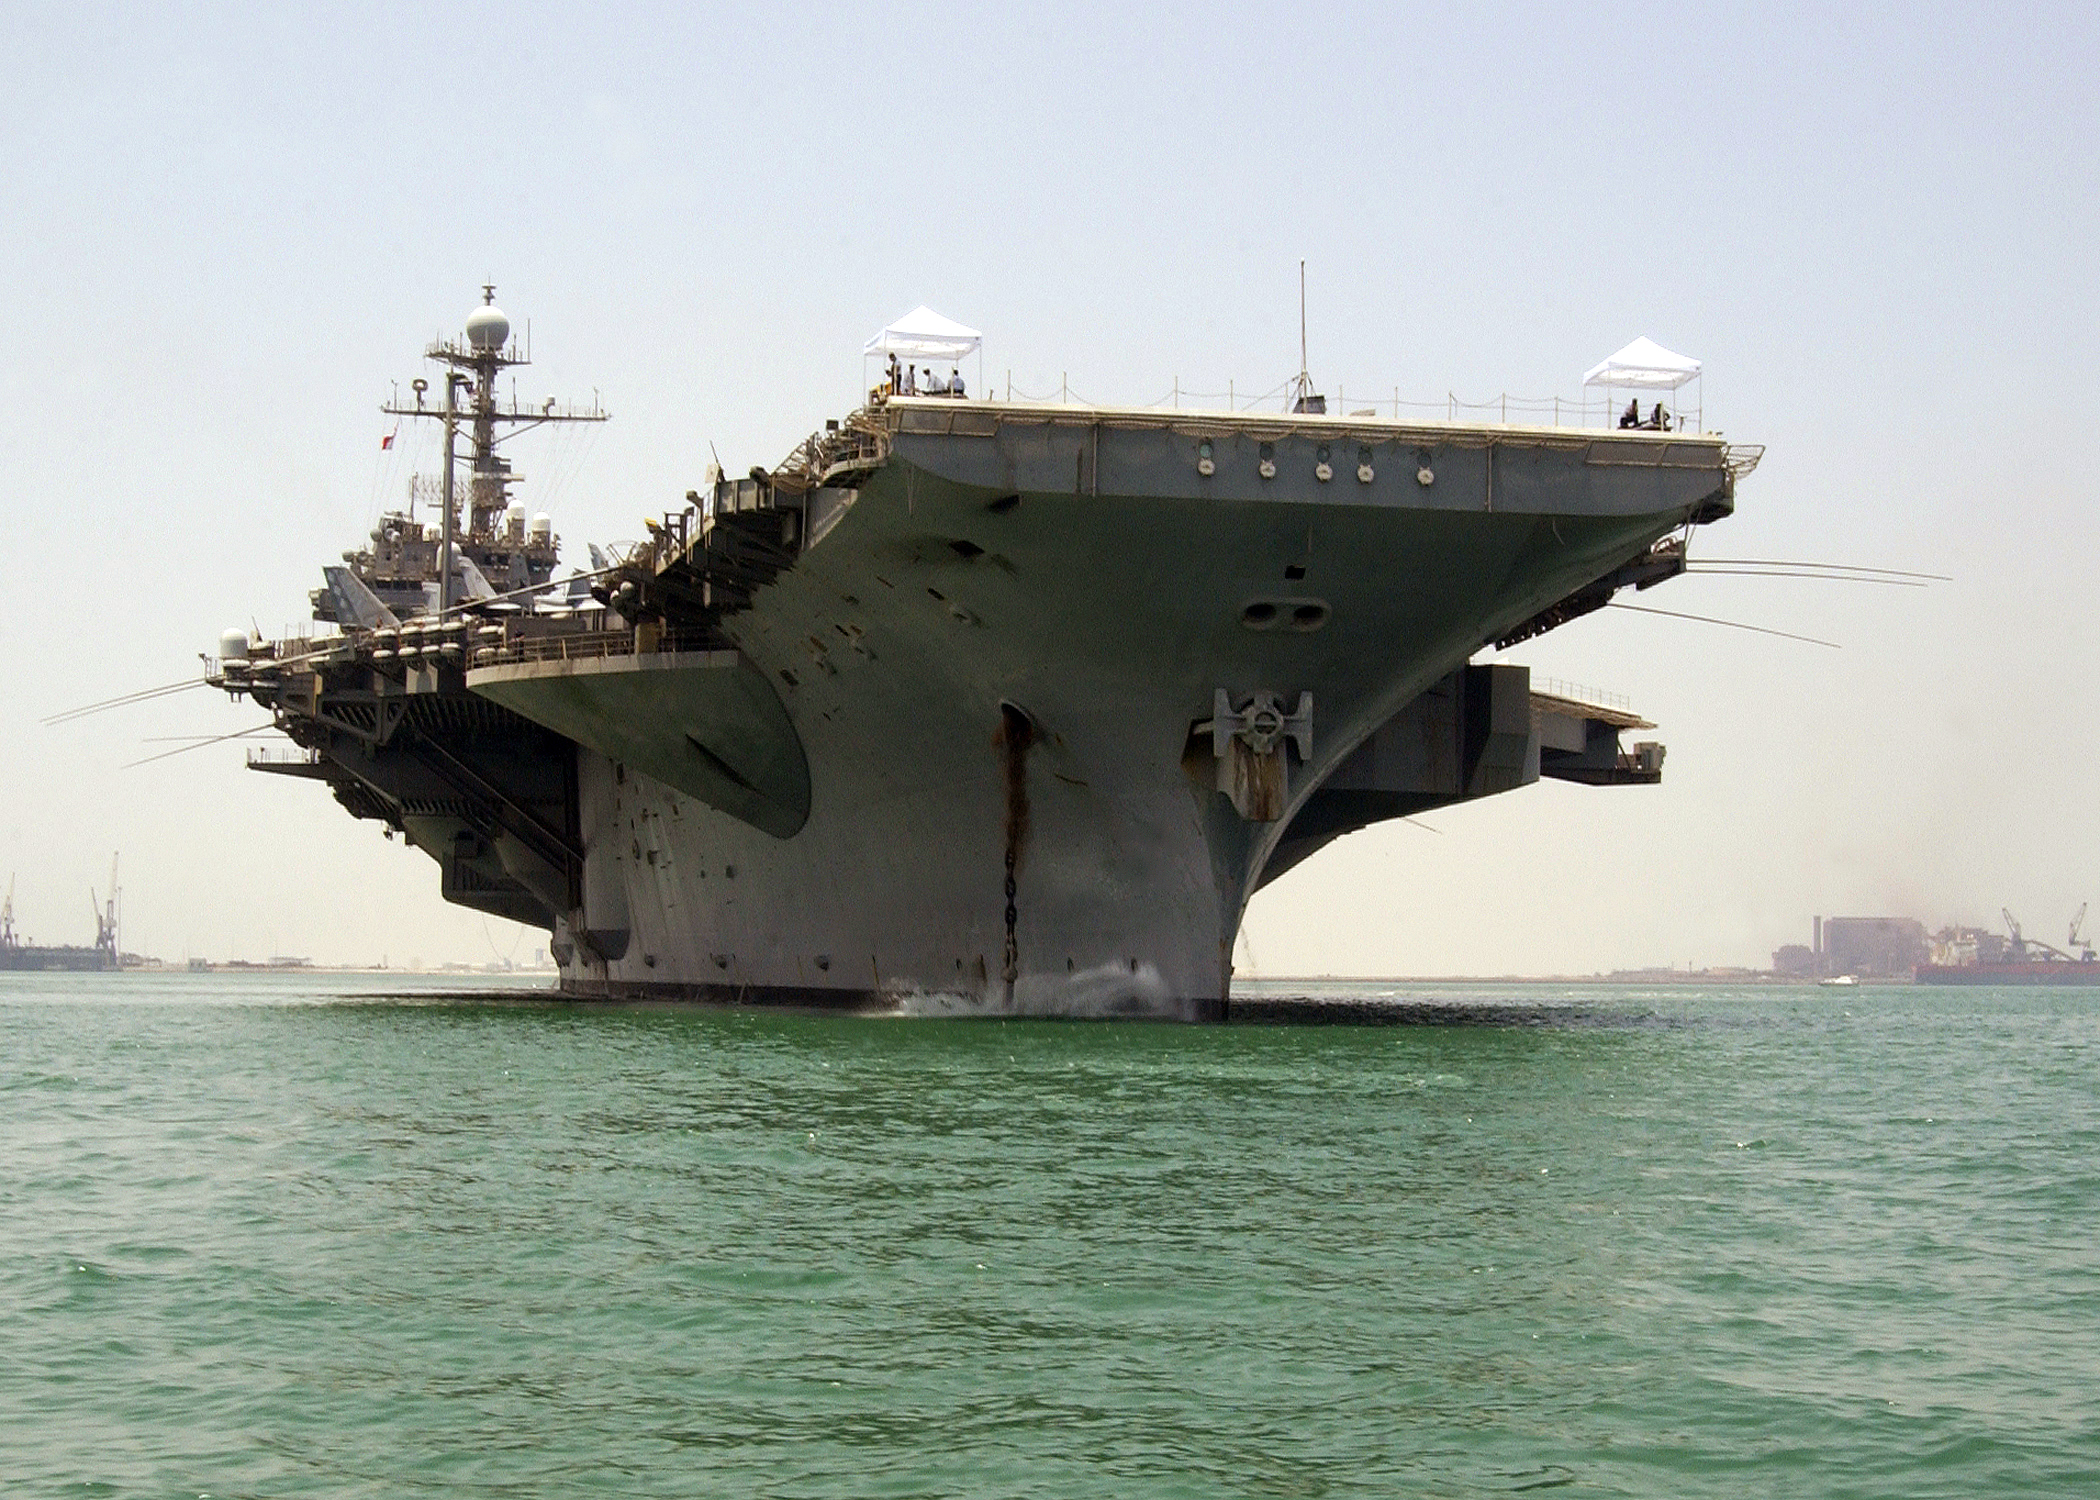 US Navy 040802-N-7034S-001 The conventional powered aircraft carrier USS John F. Kennedy (CV 67) drops anchor off the coast of Manama, Bahrain for a port visit